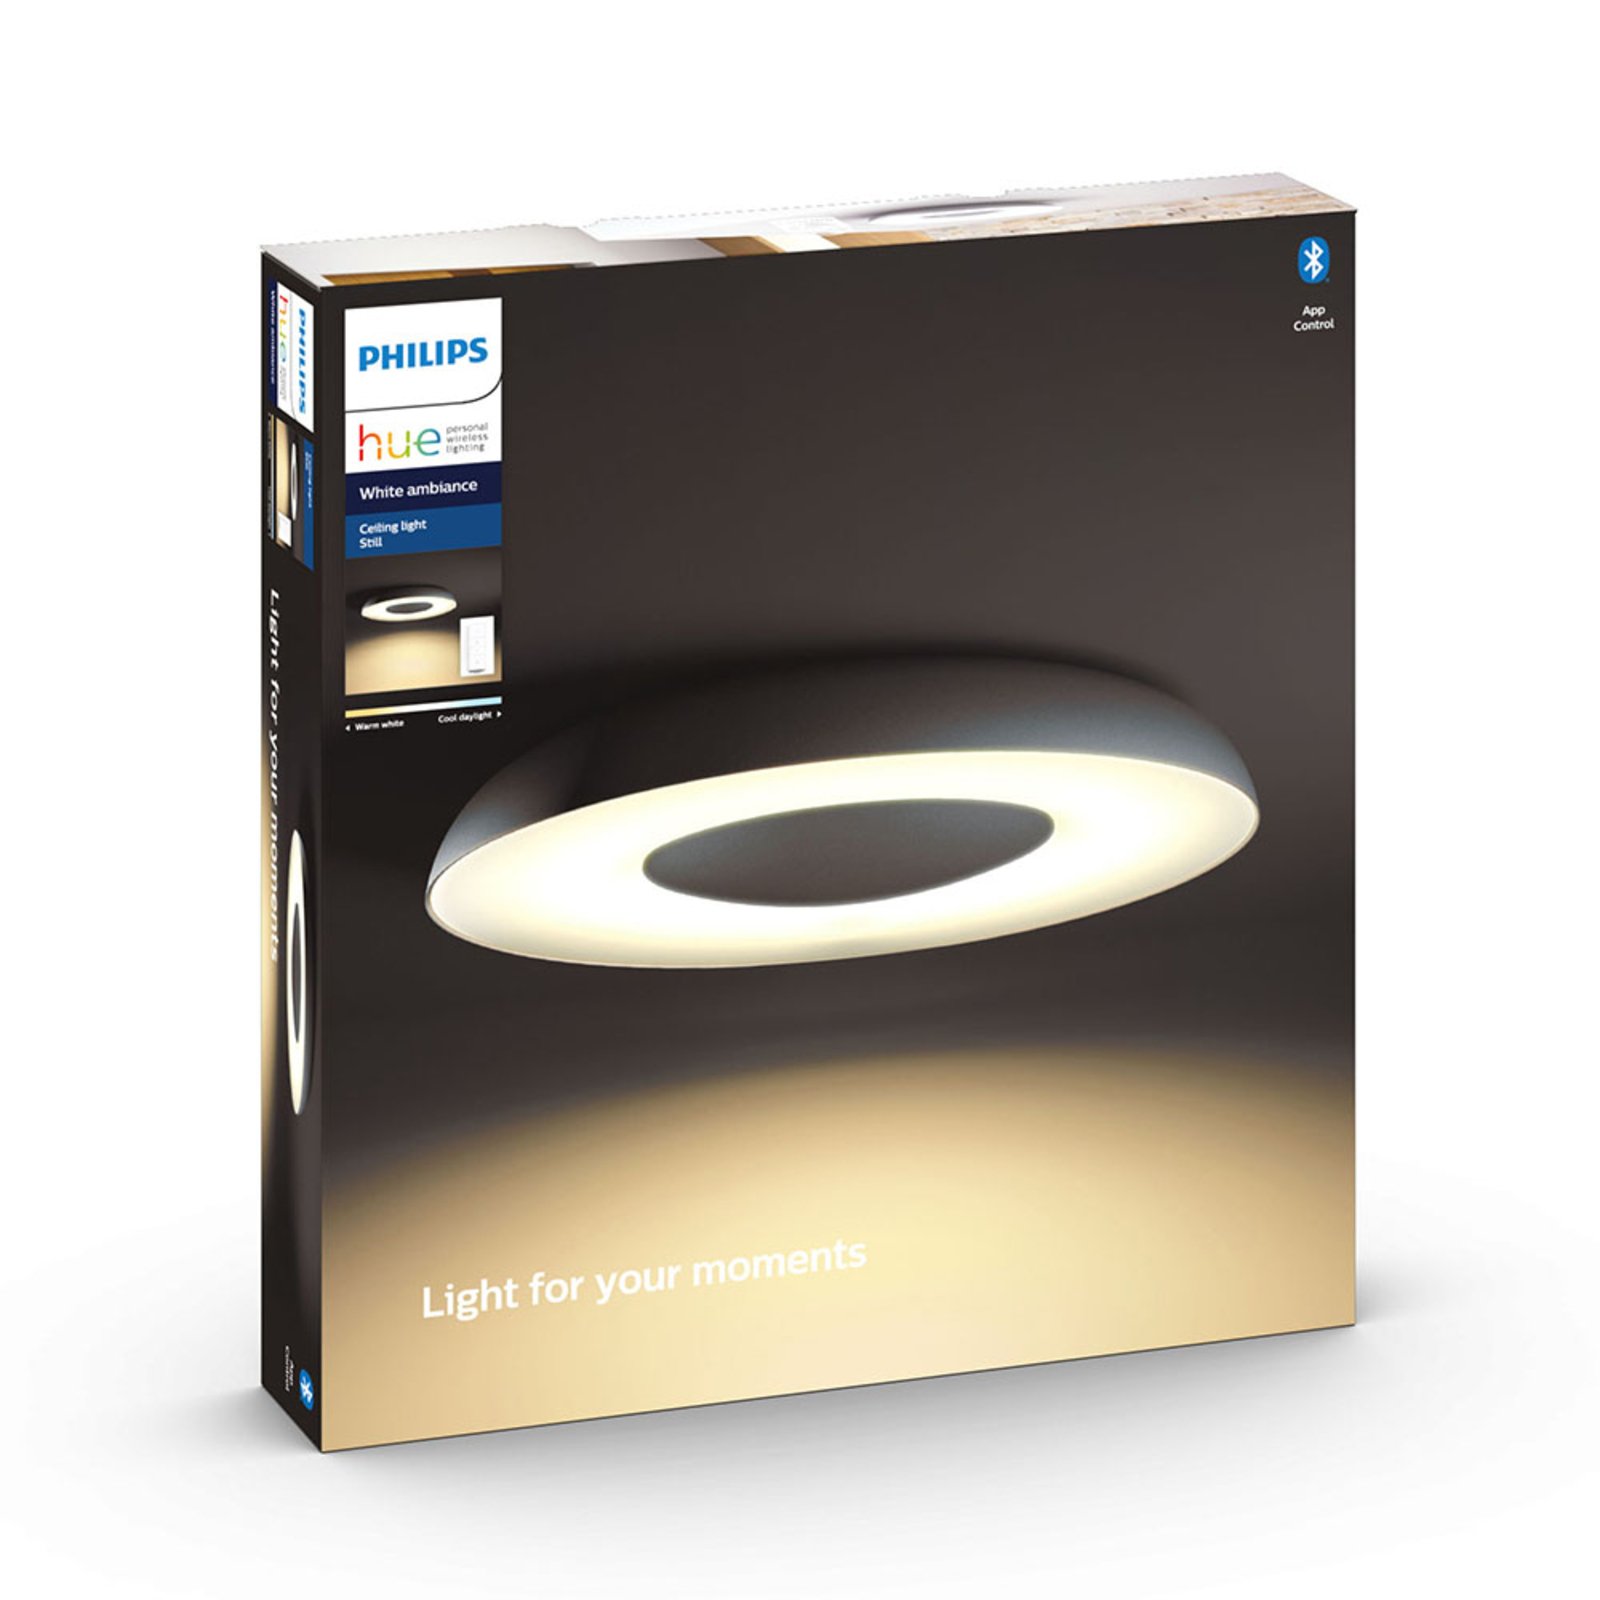 Philips Hue White Ambiance Still, crna